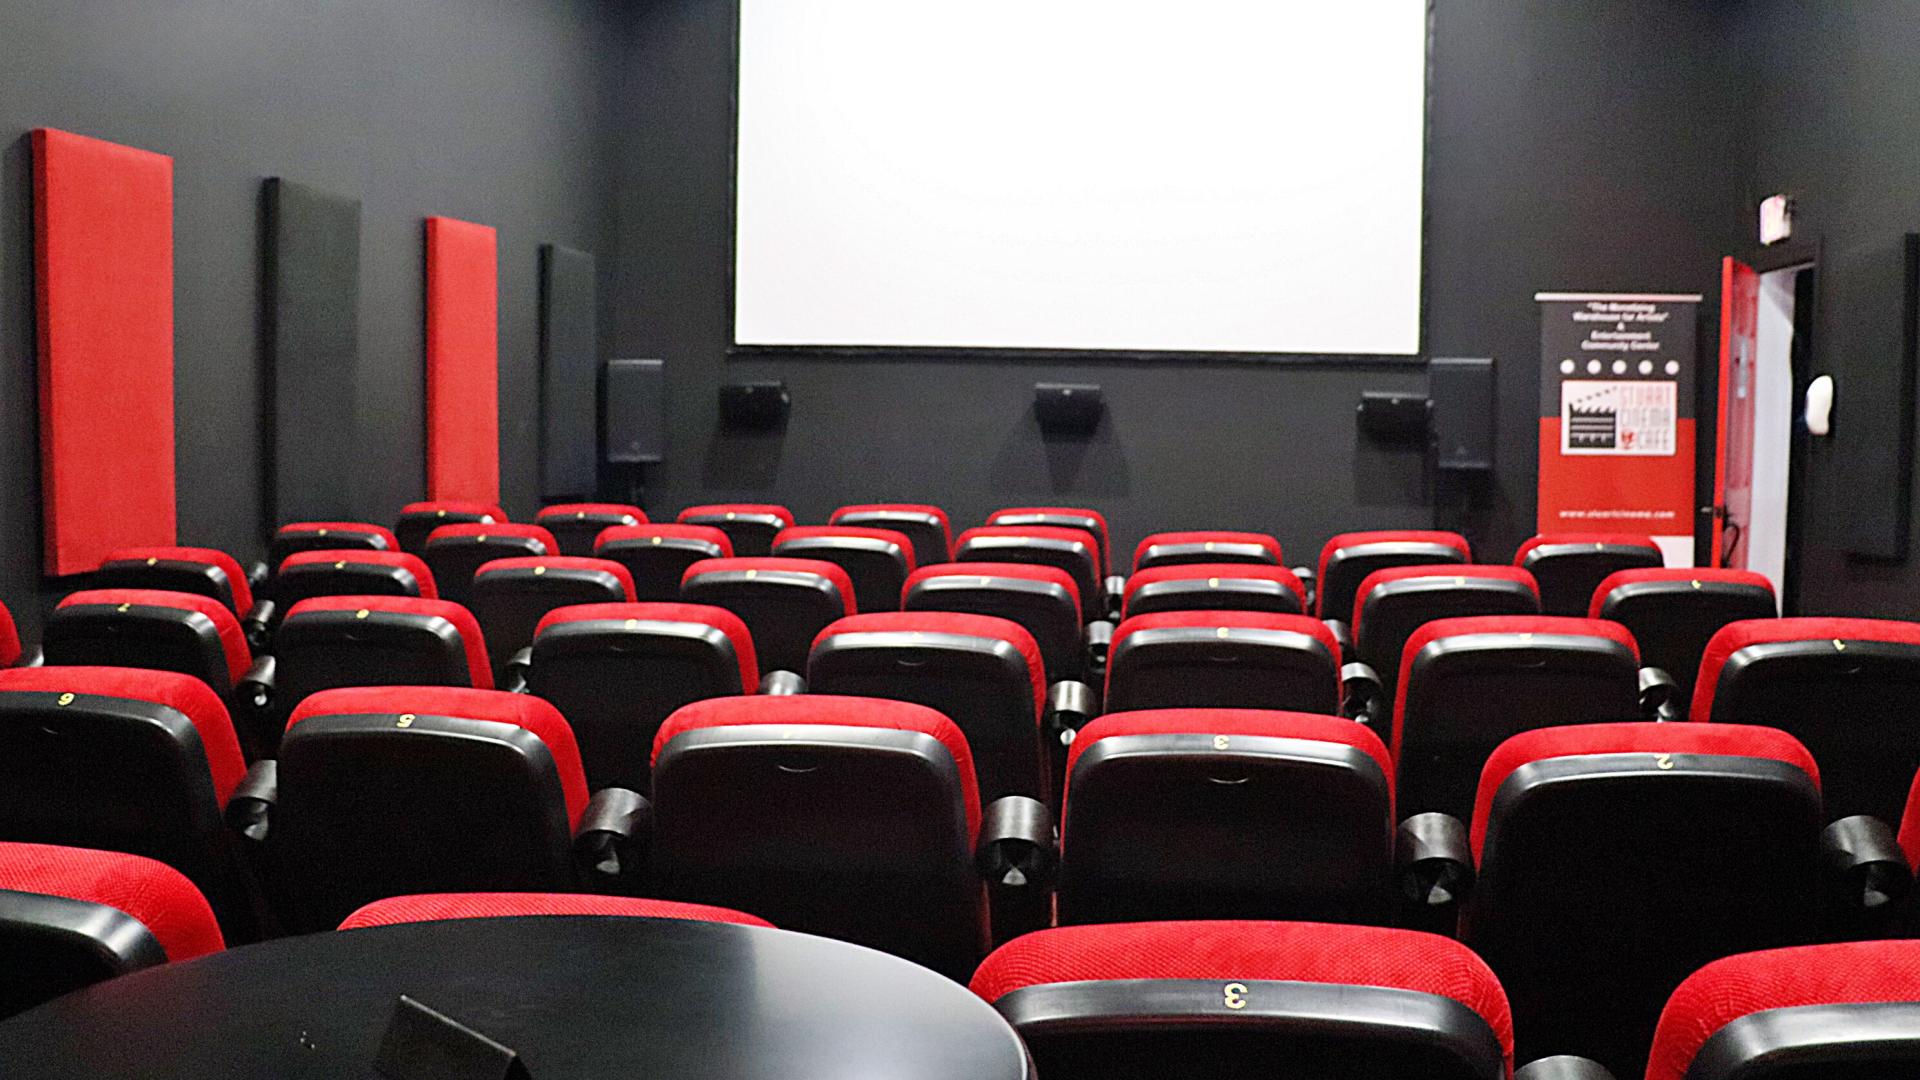 Private Screening Rooms for Rent in Manhattan, NY